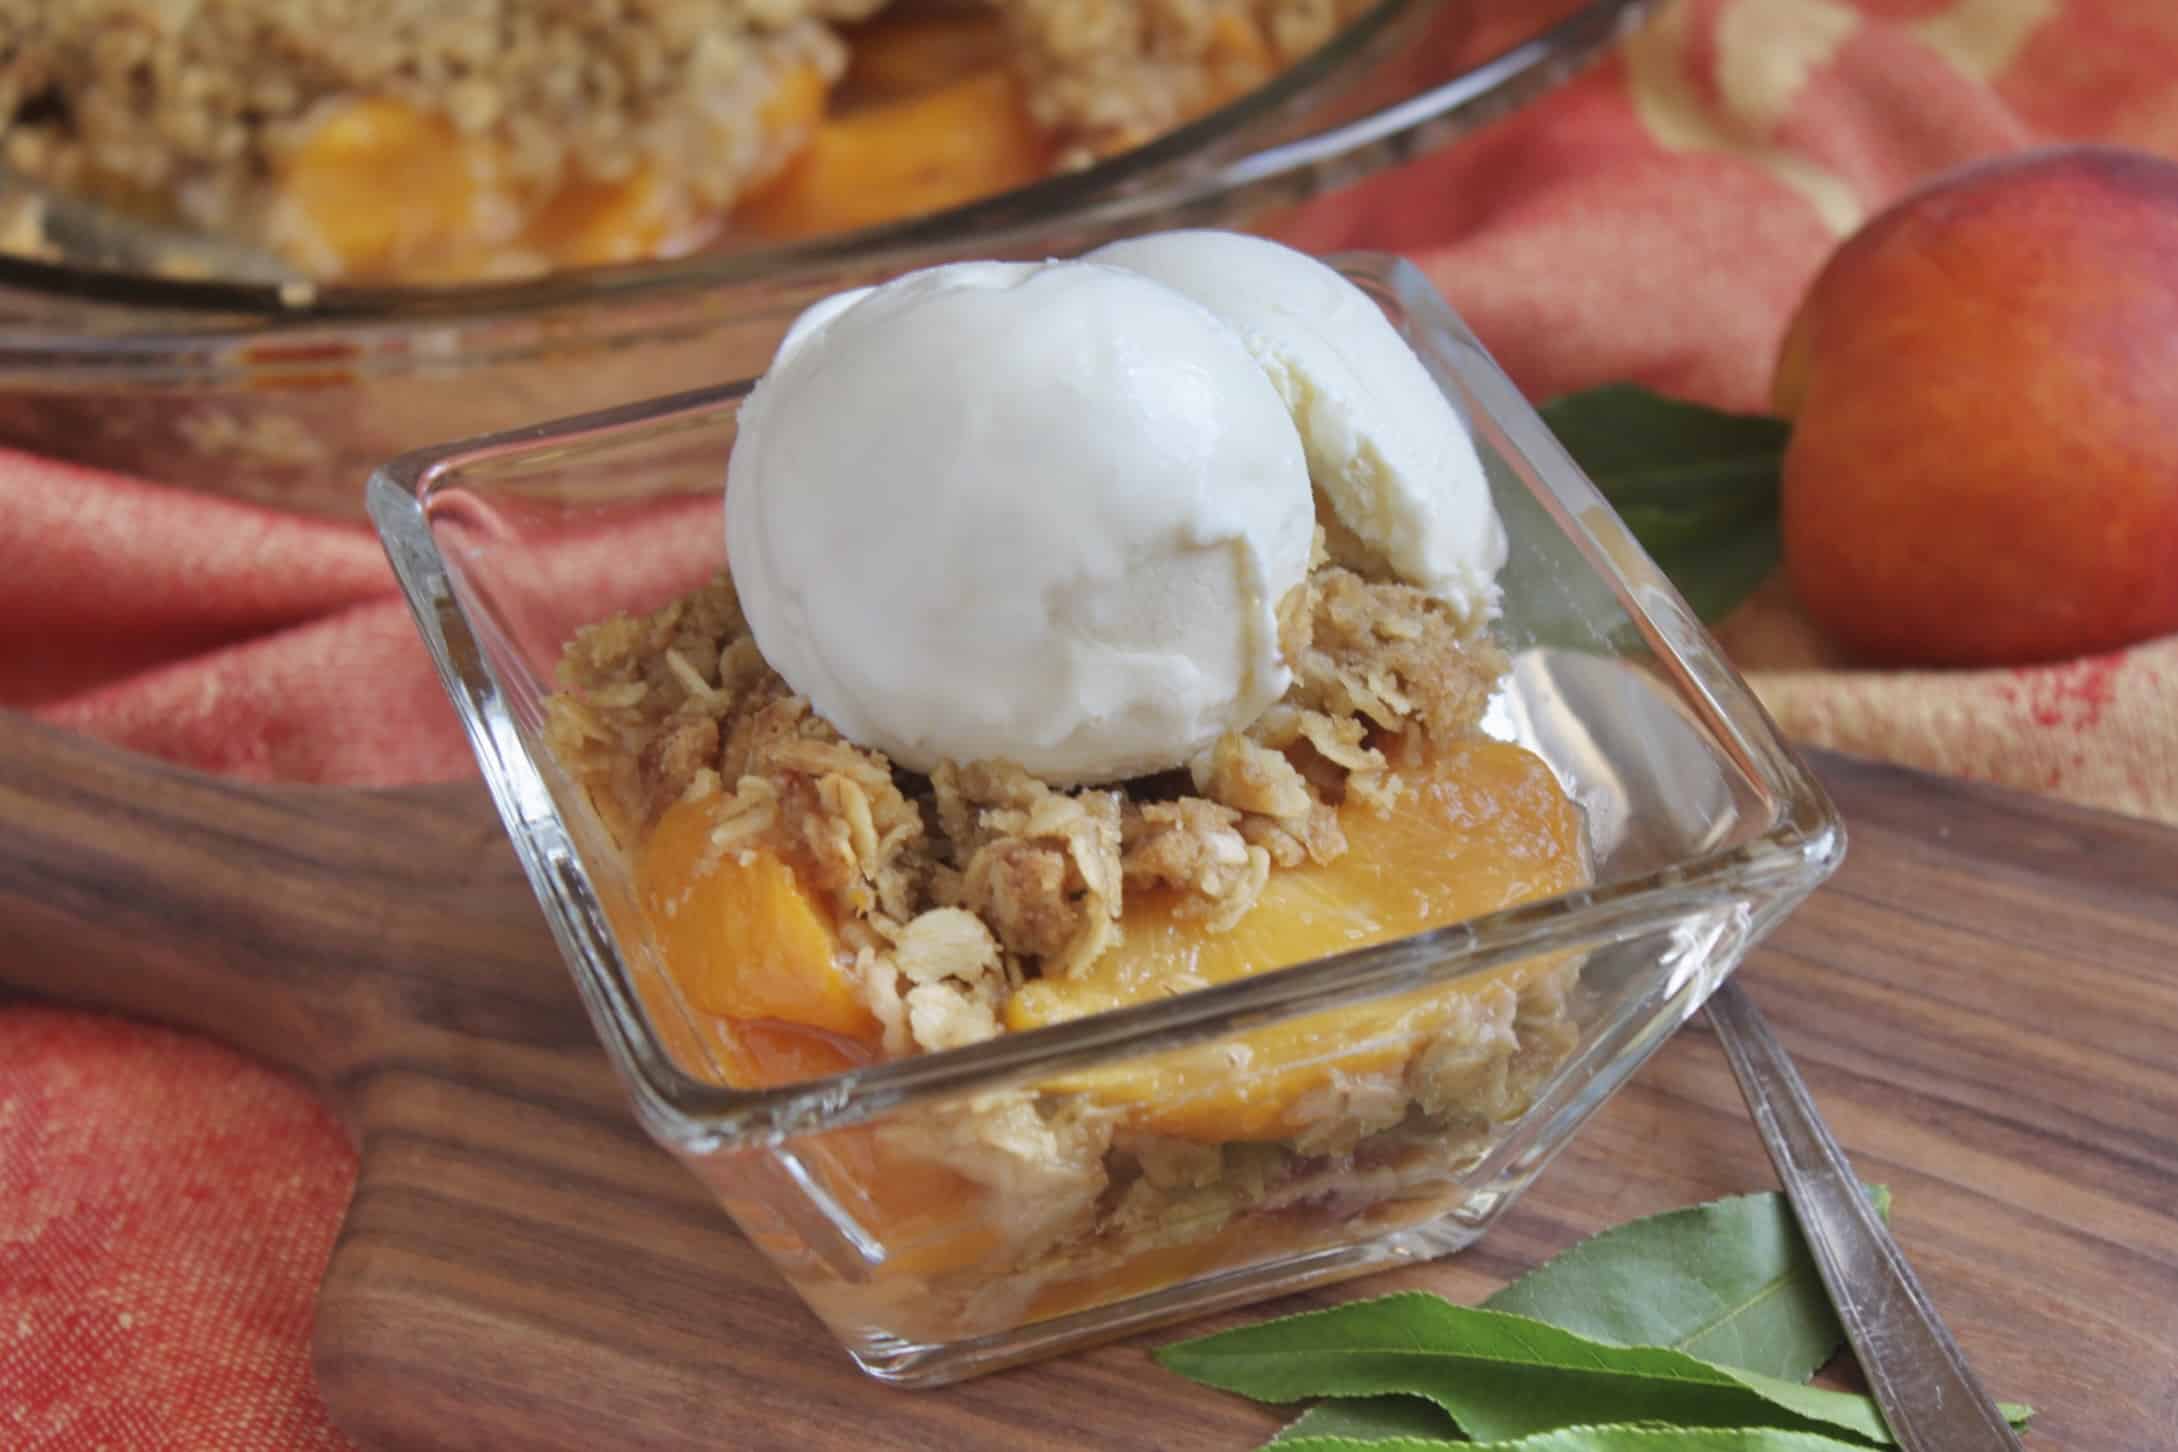 square glass bowl with peach dessert and ice cream